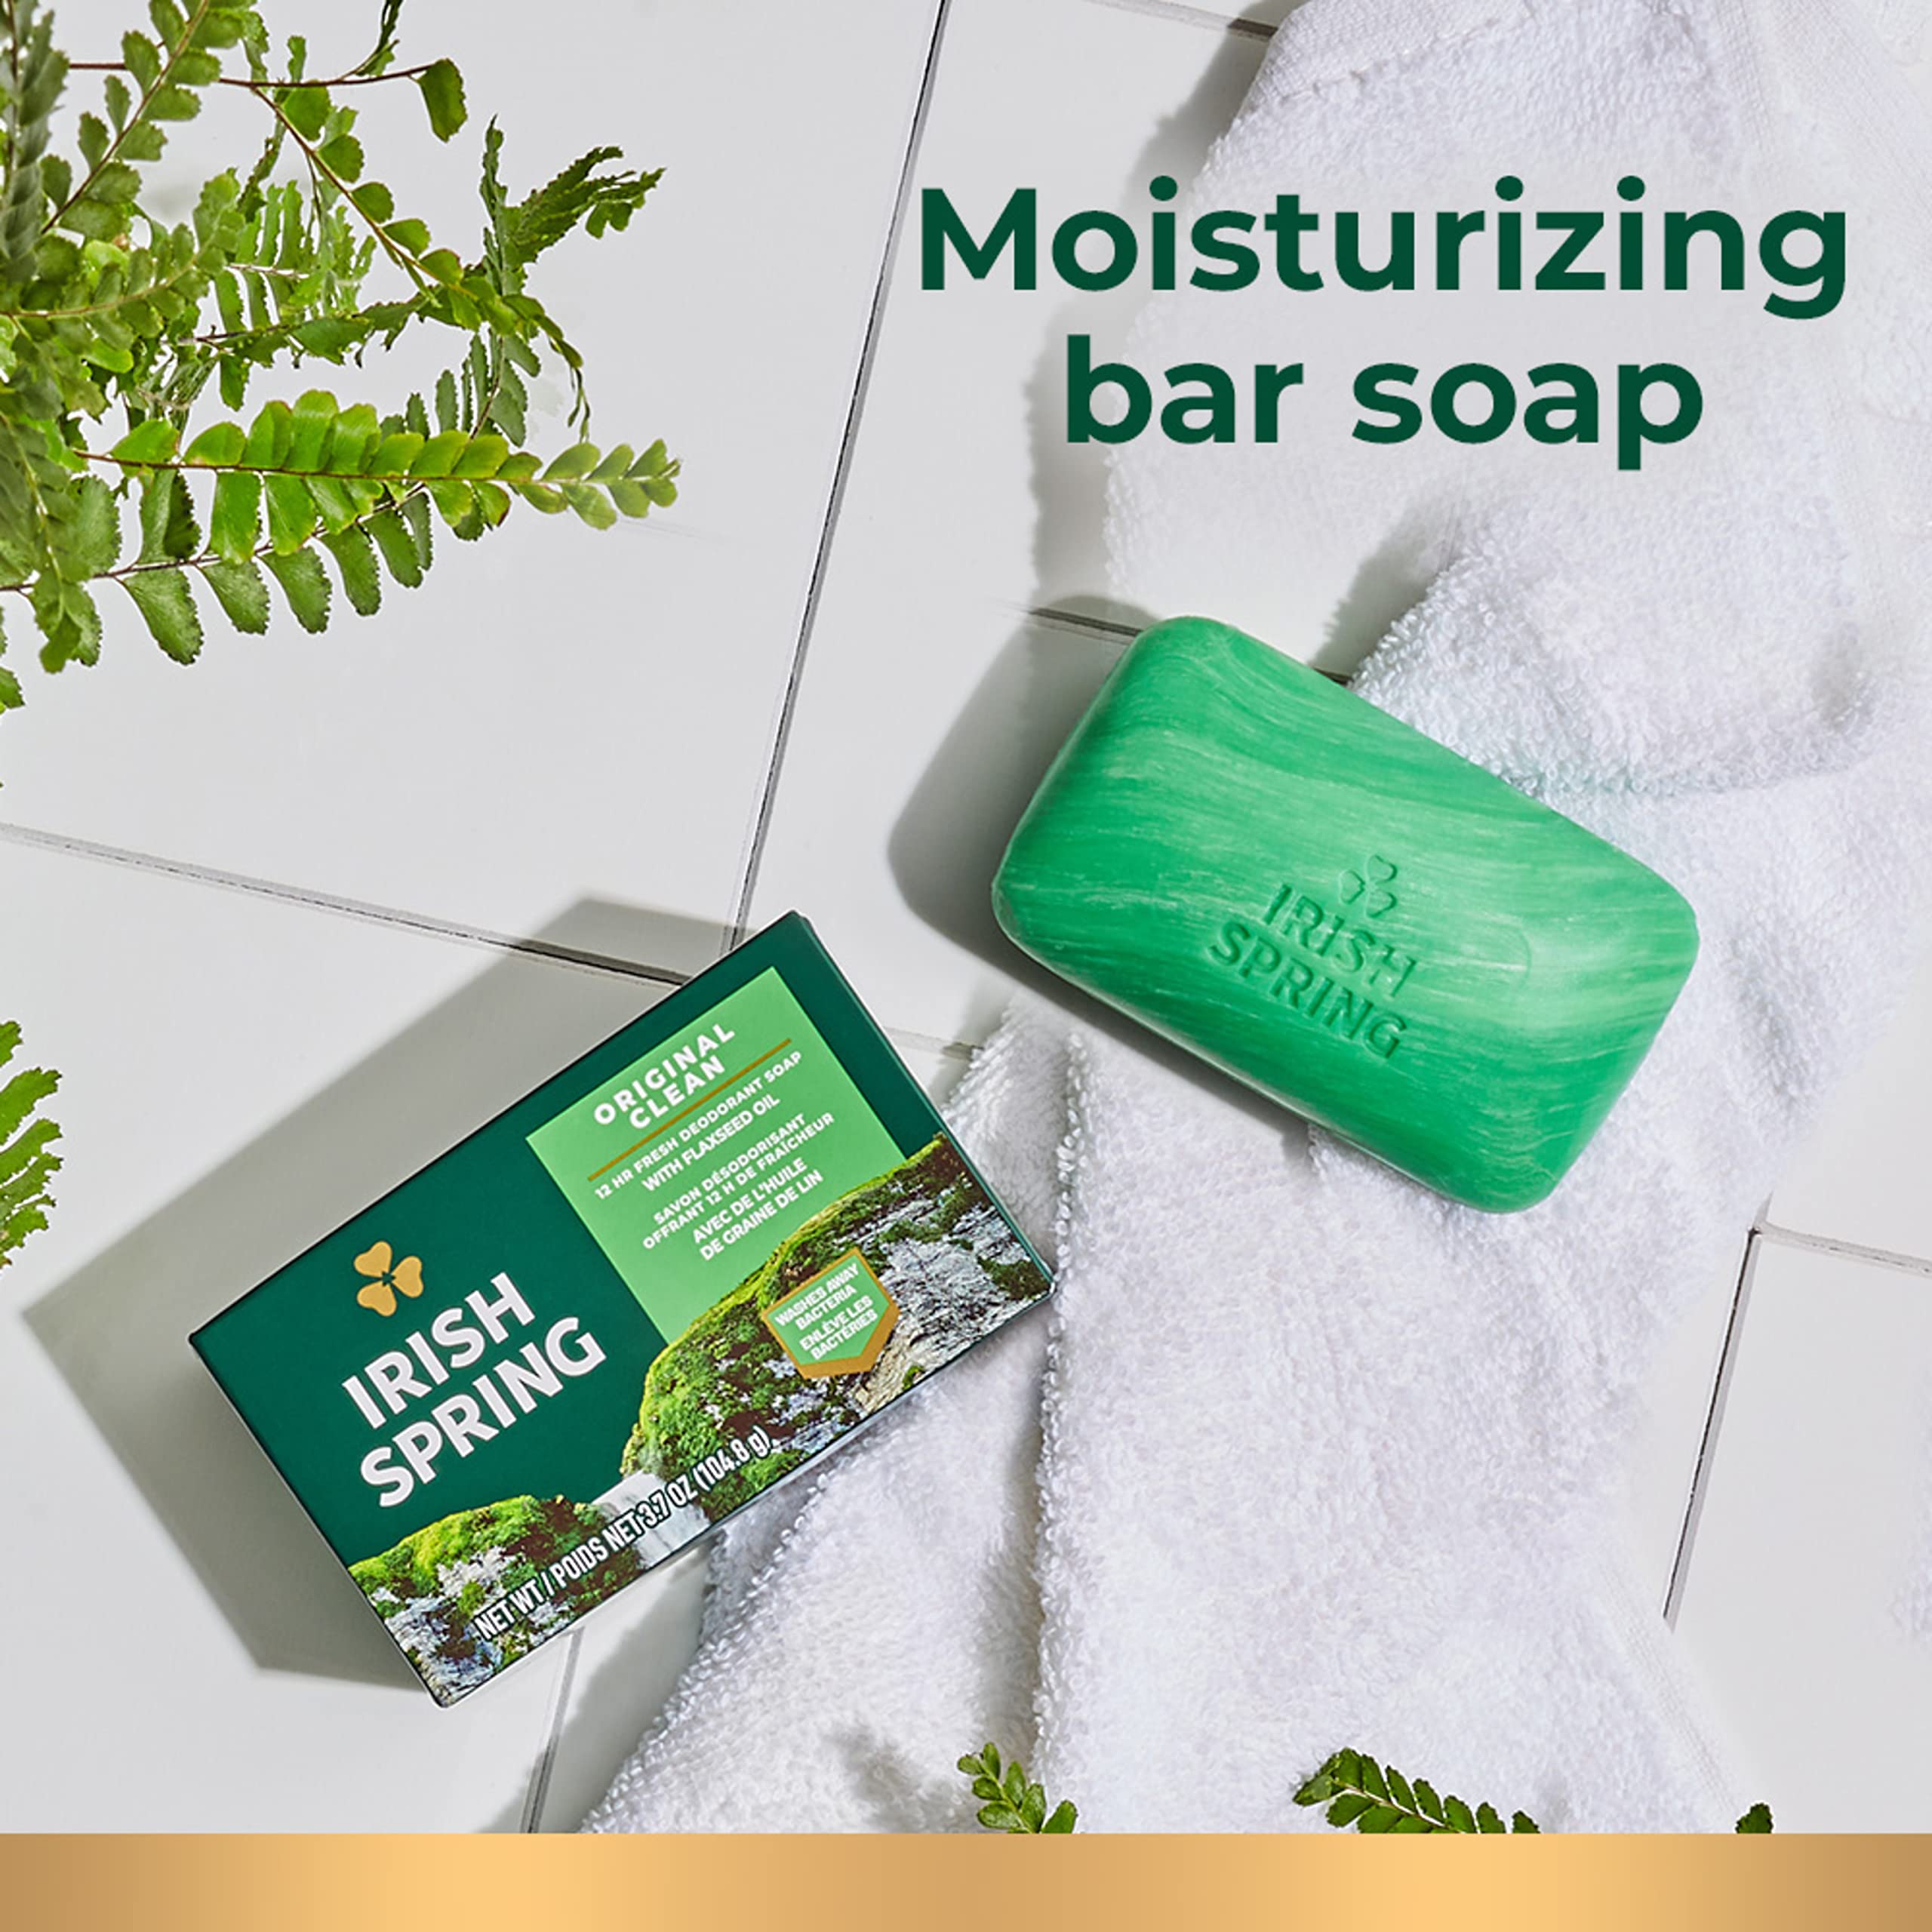 Irish Spring Bar Soap for Men, Original Clean, Smell Fresh and Clean for 12 Hours, Men Soap Bars for Washing Hands and Body, Mild for Skin, Recyclable Carton, 3.7 Ounce - 3 Count (Pack of 8)